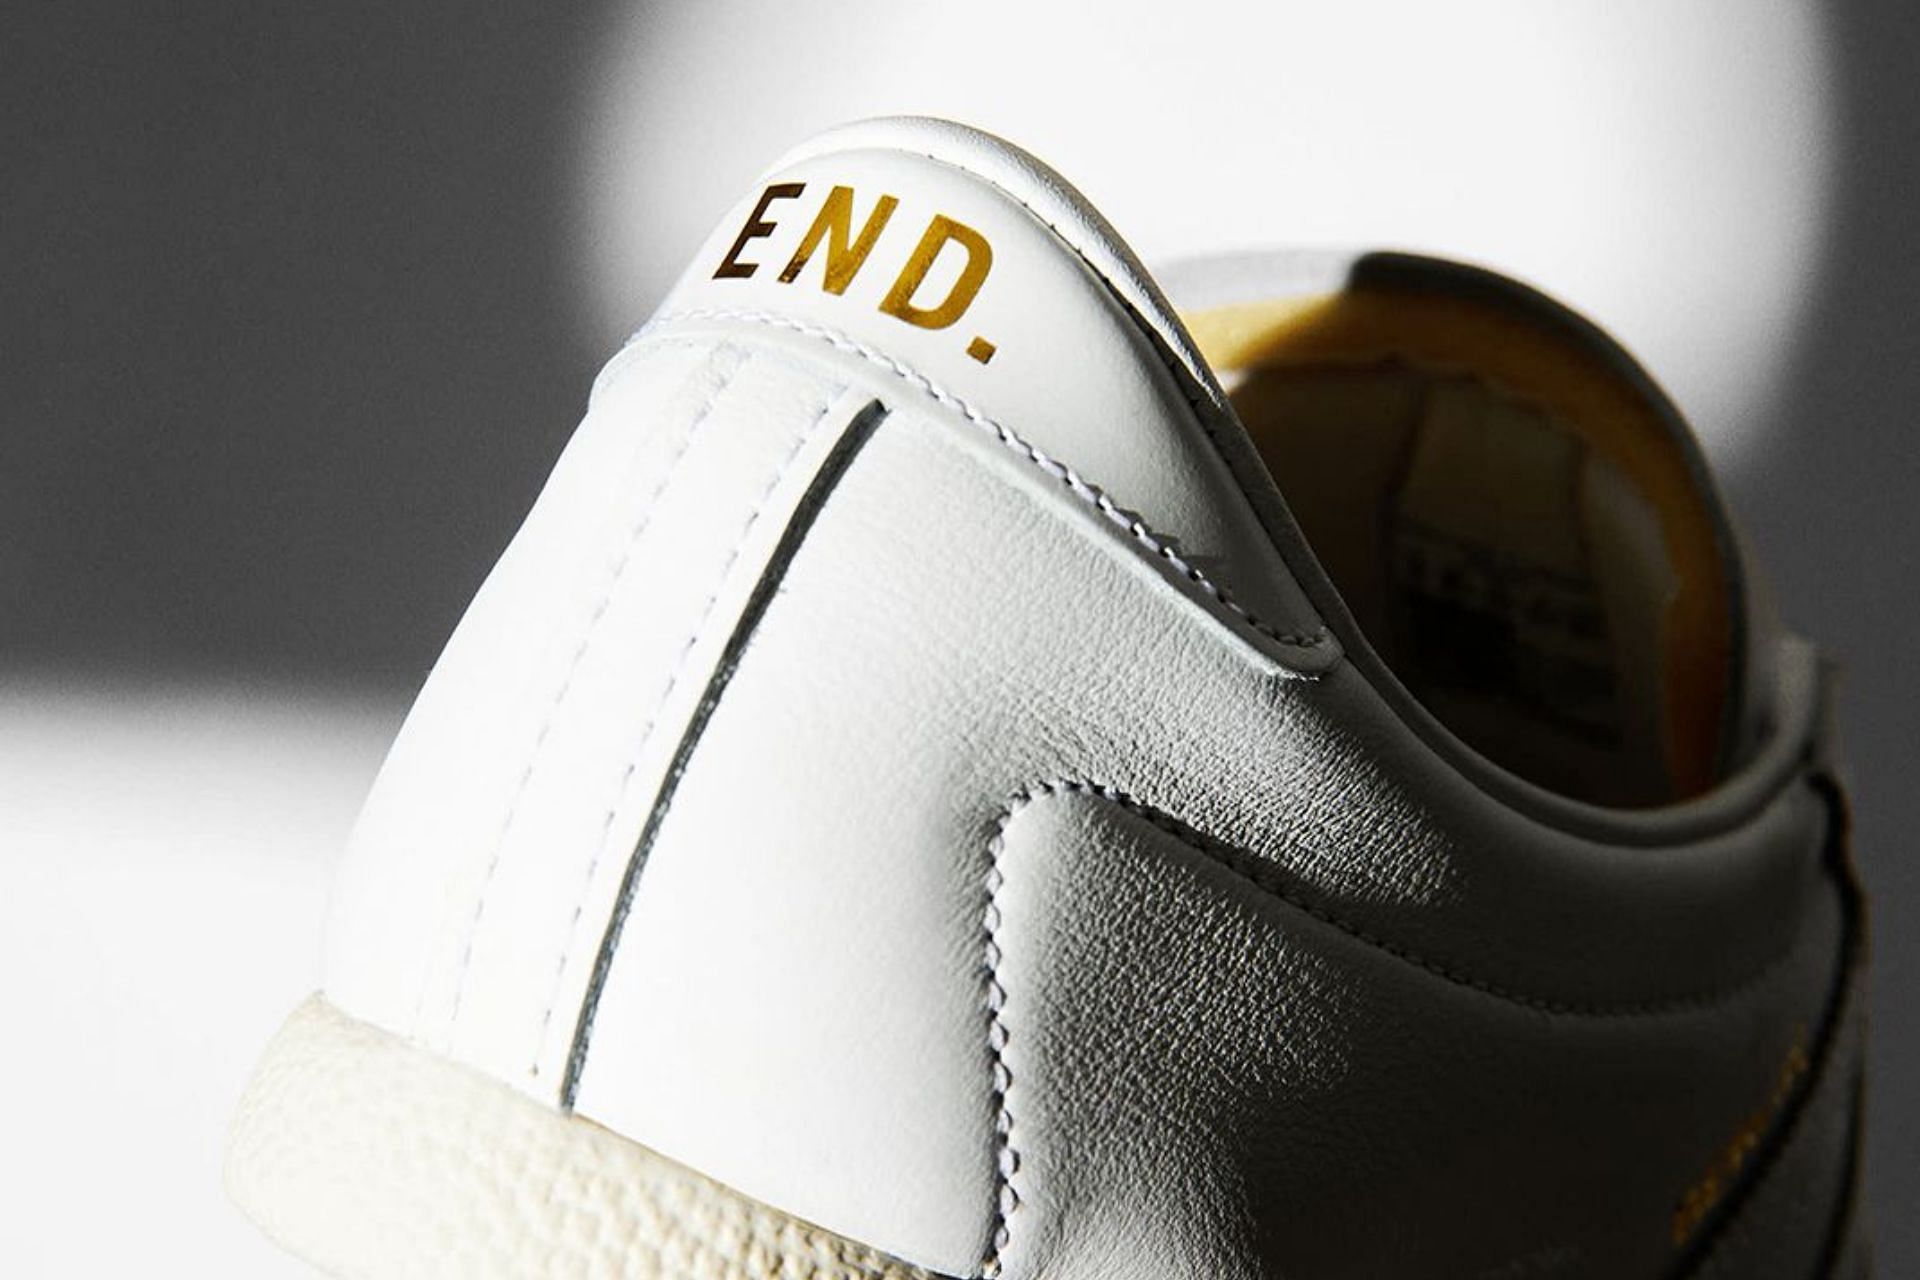 Here&#039;s a detailed look at the heel counter of the low-top shoes (image via END. Clothing)